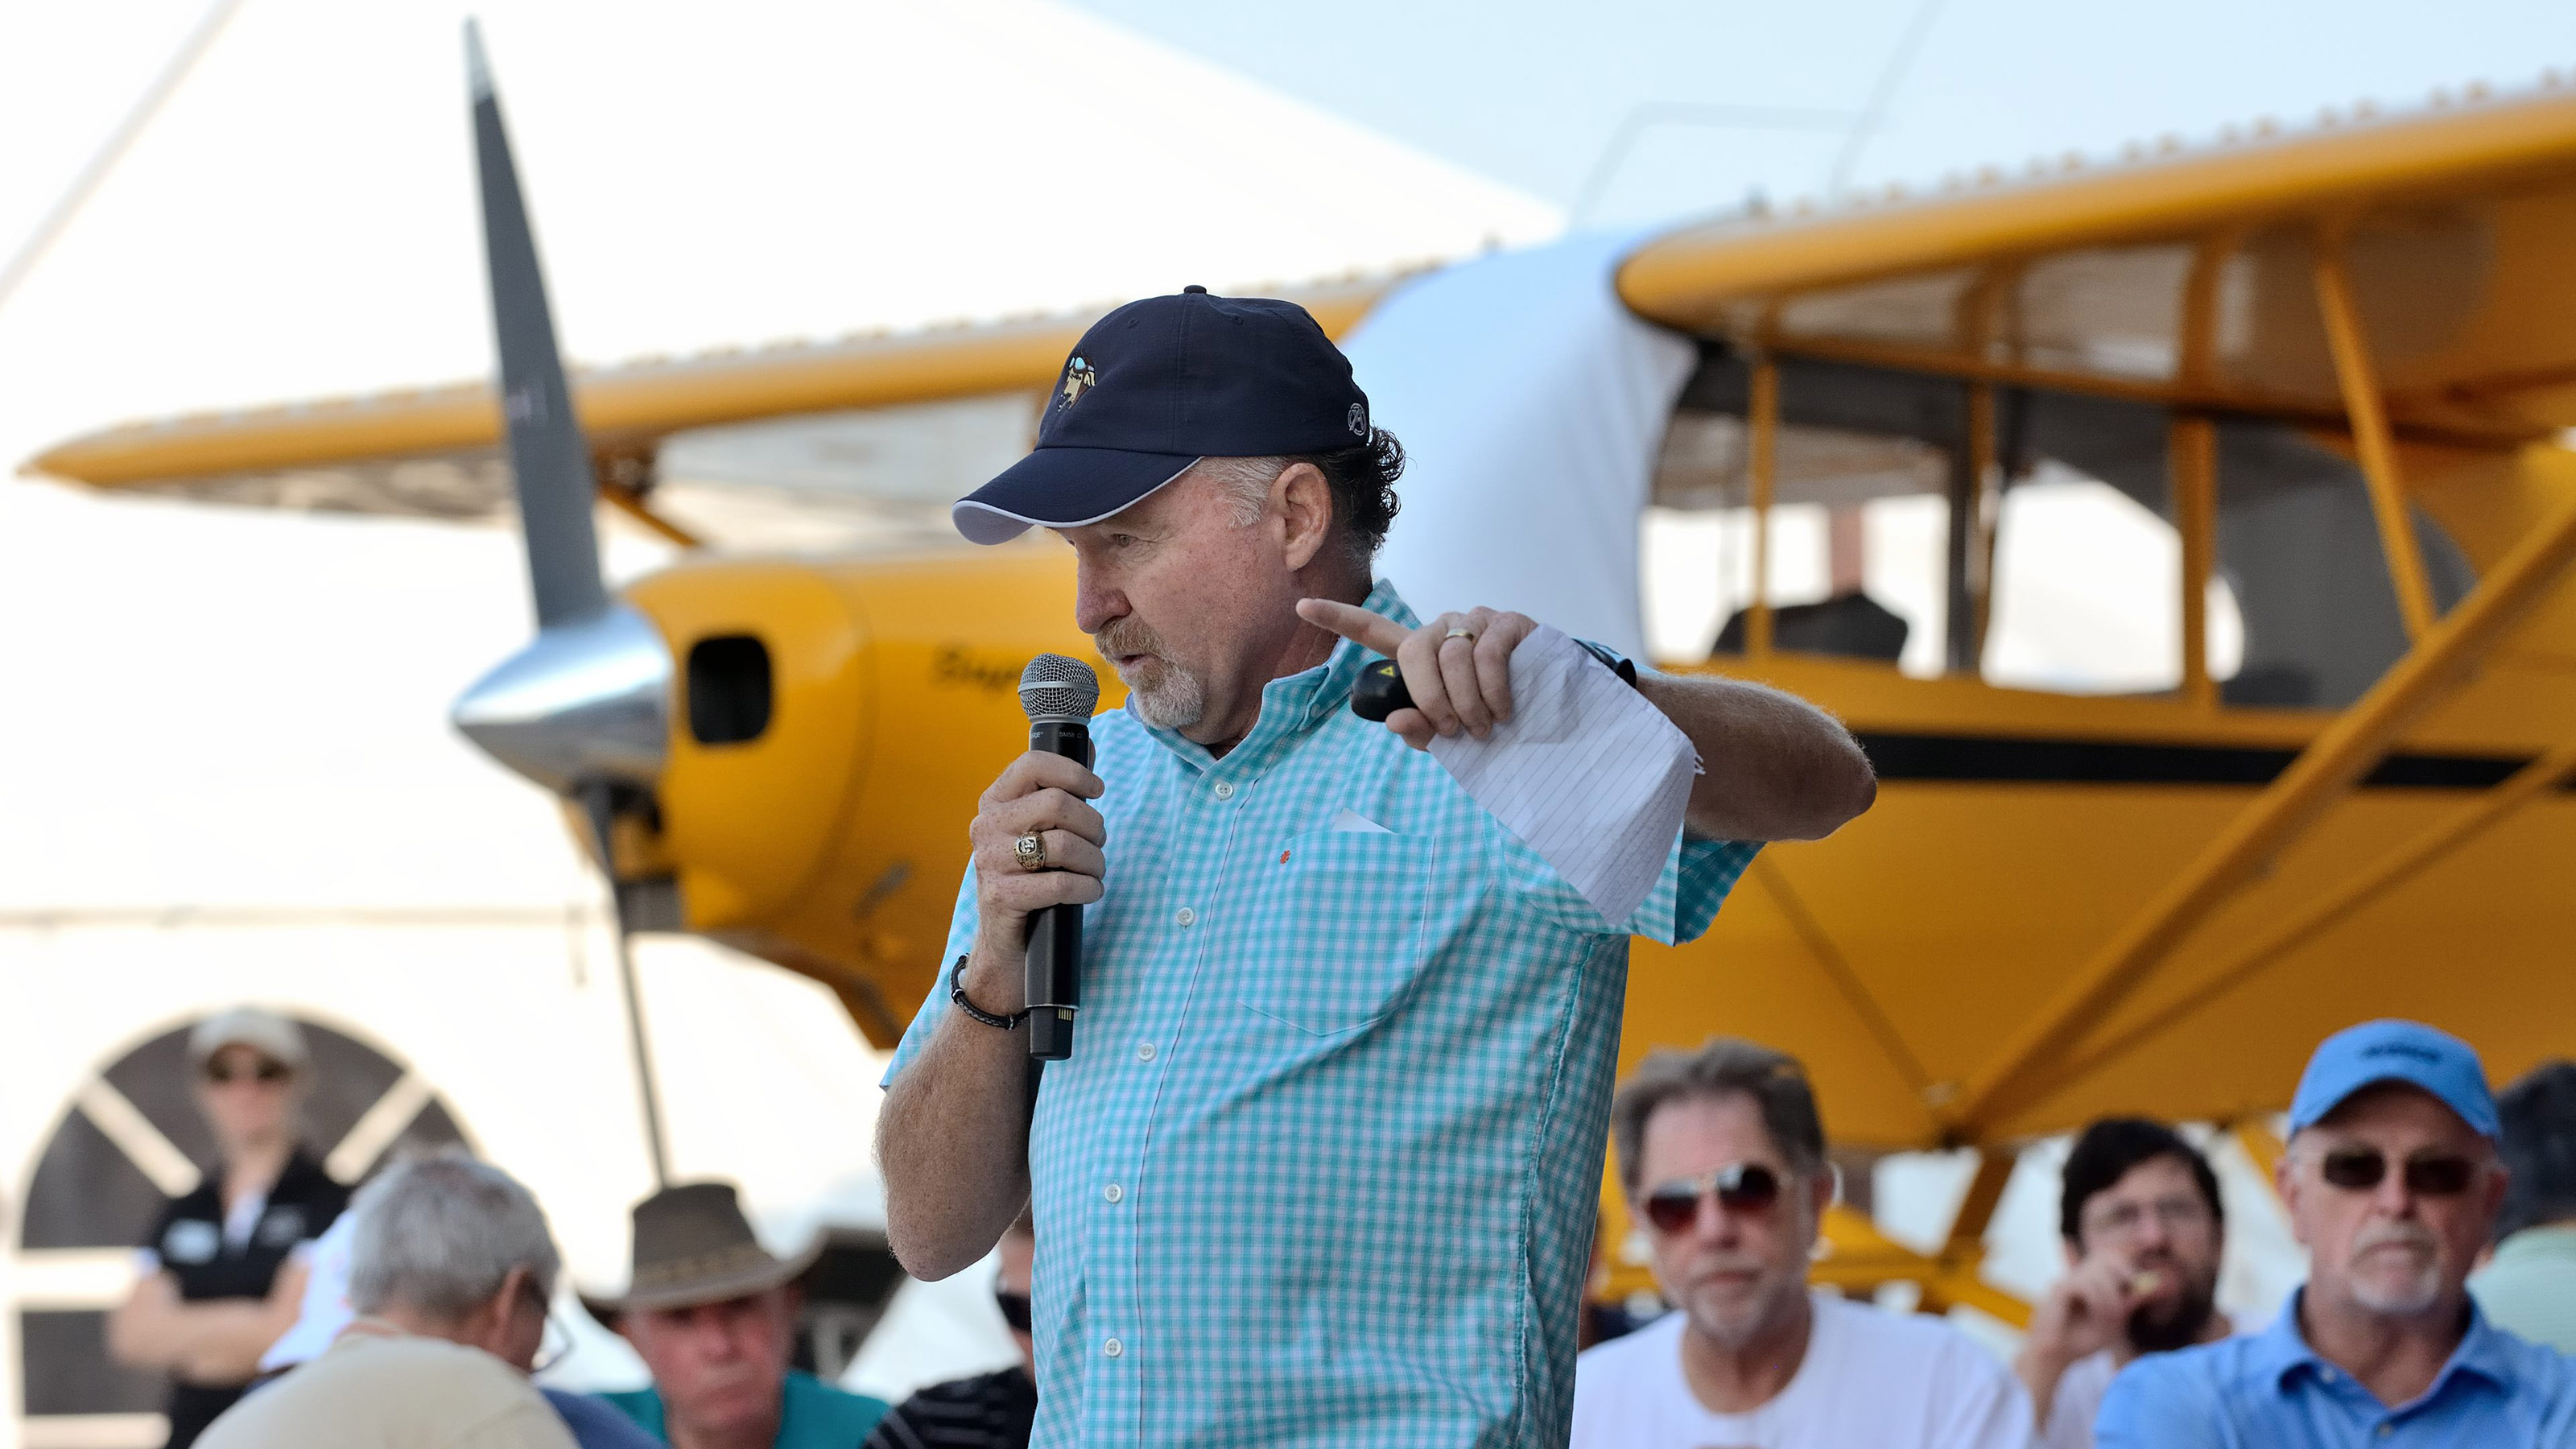 During Saturday's pancake breakfast at AOPA's 2017 Norman Fly-In, Doug Jackson of Operation Airdrop talks about relief flights made by the new organization to hurricane-ravaged areas in Texas. Photo by Mike Collins.